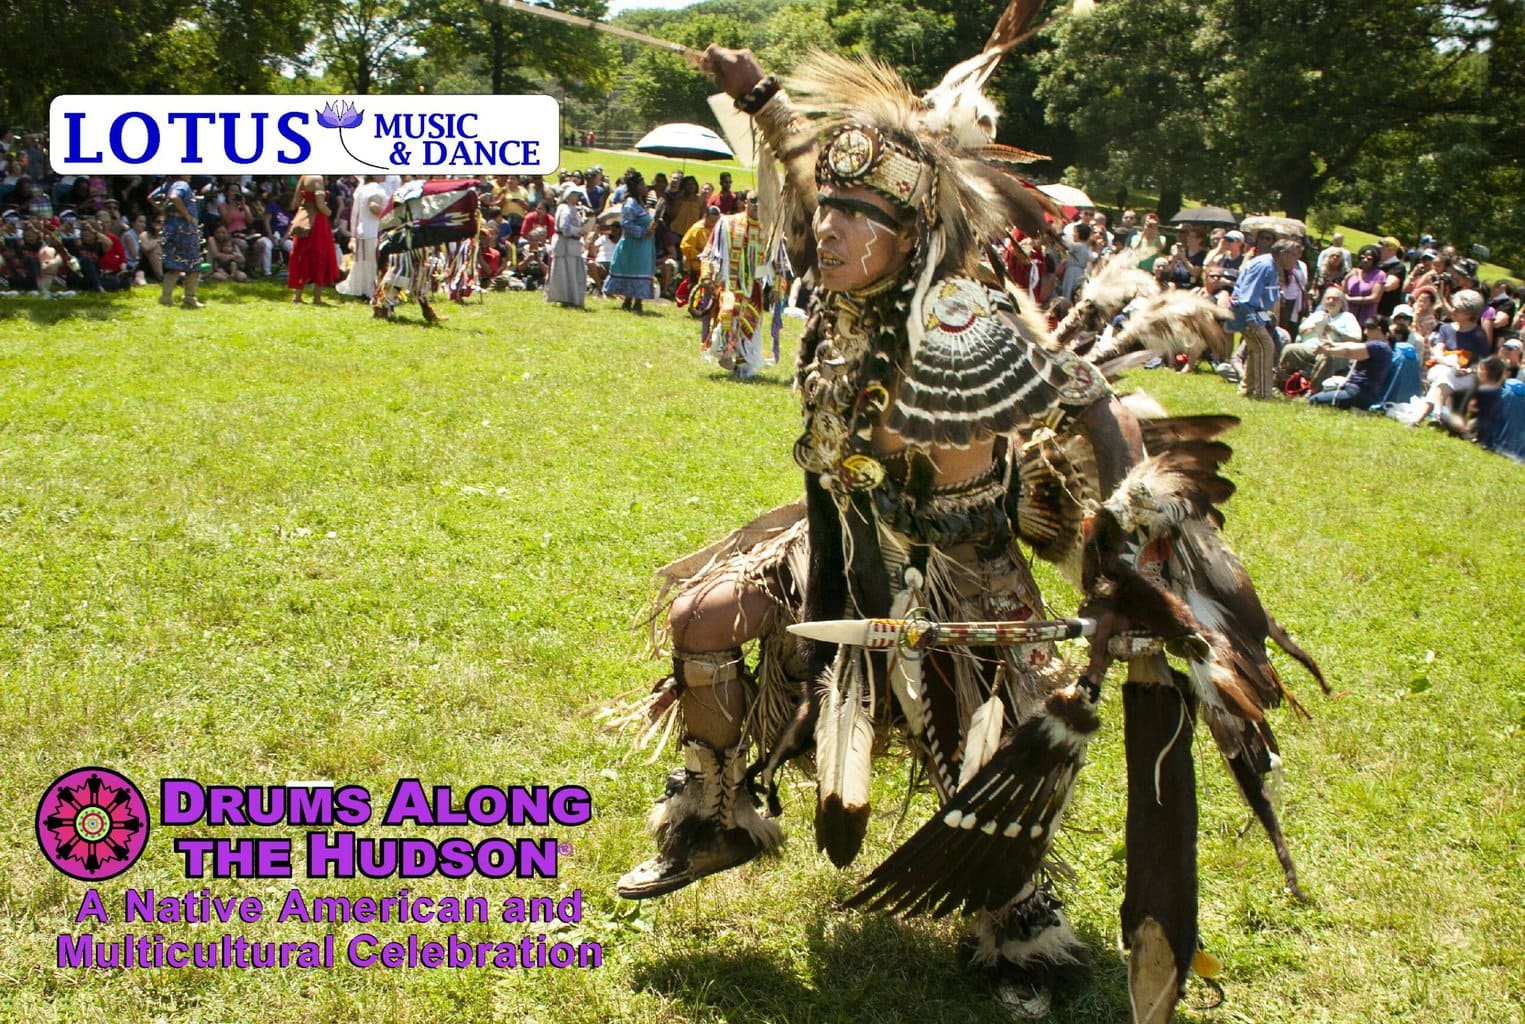 Drums Along the Hudson: A Native American Festival and Multicultural Celebration 2023